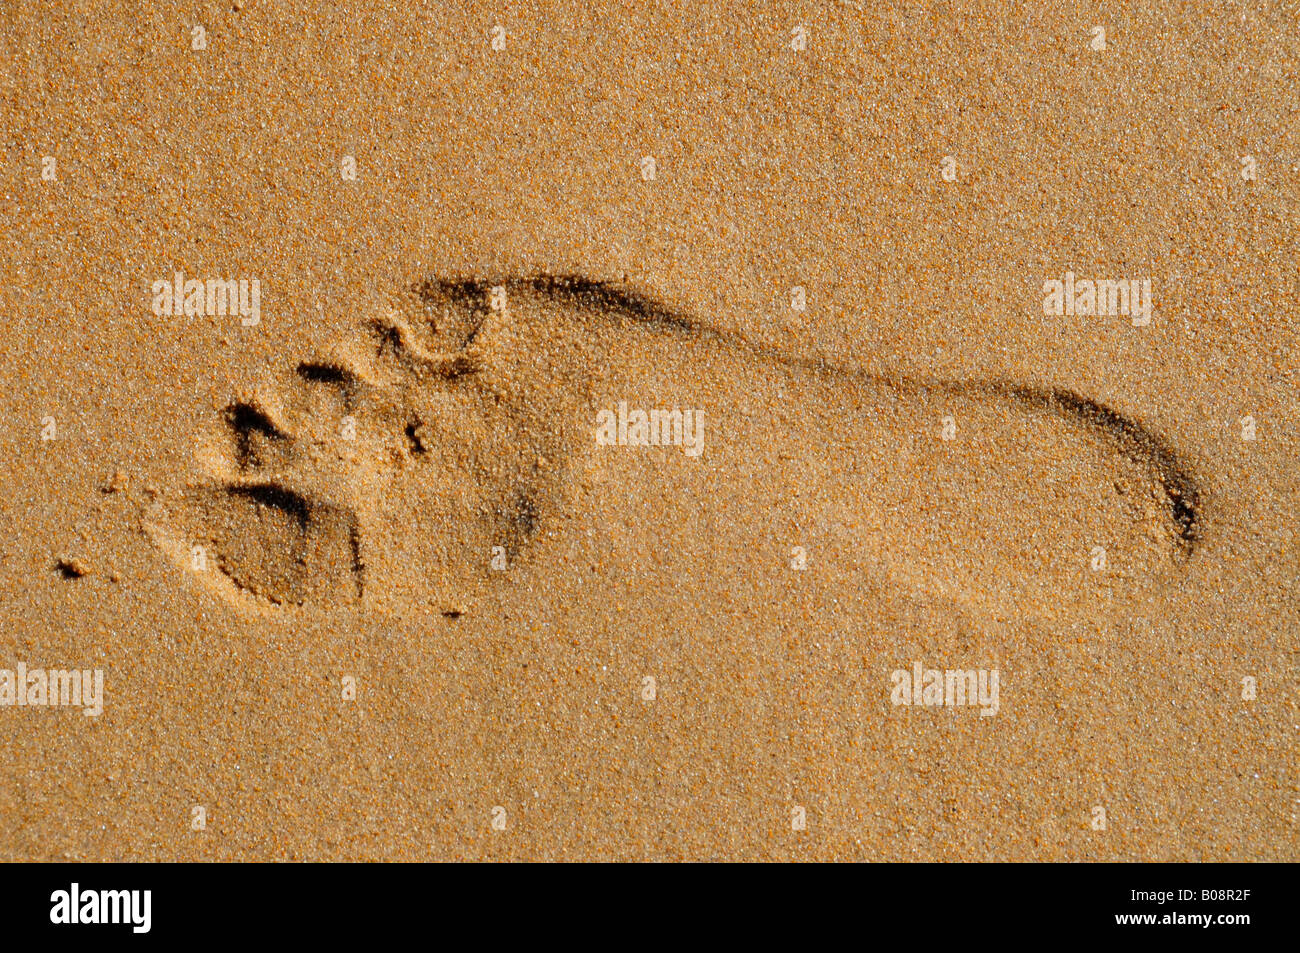 Footprint in the sand, right foot, on the beach at Benidorm, Costa Blanca, Spain Stock Photo